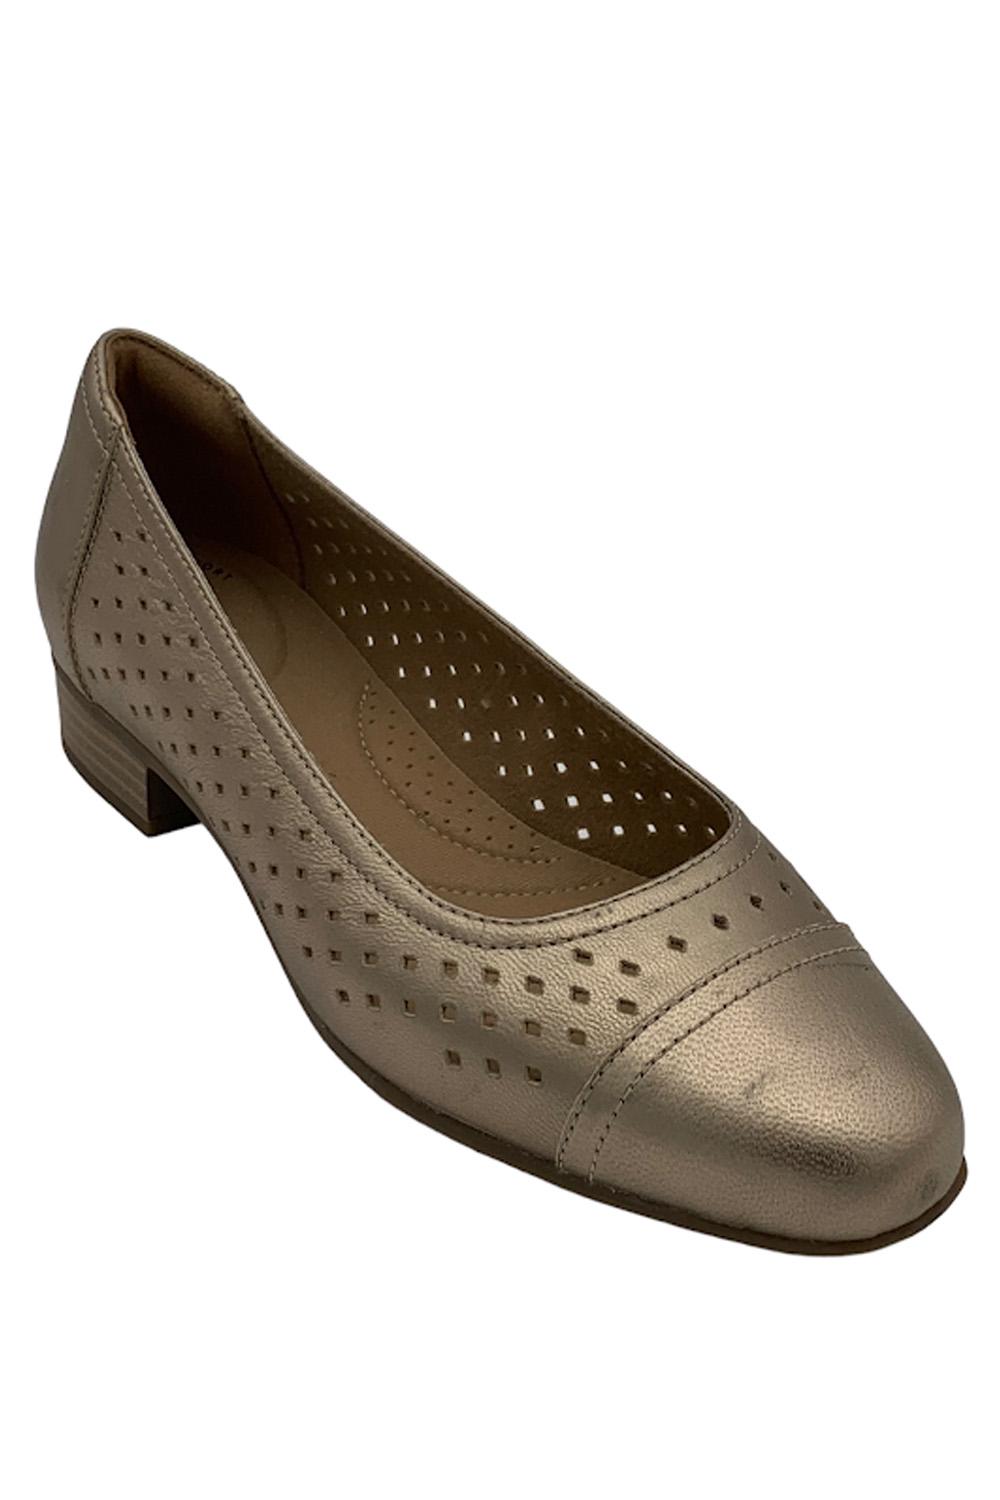 Clarks Collection Perforated Leather Pumps Juliet Metallic | Jender